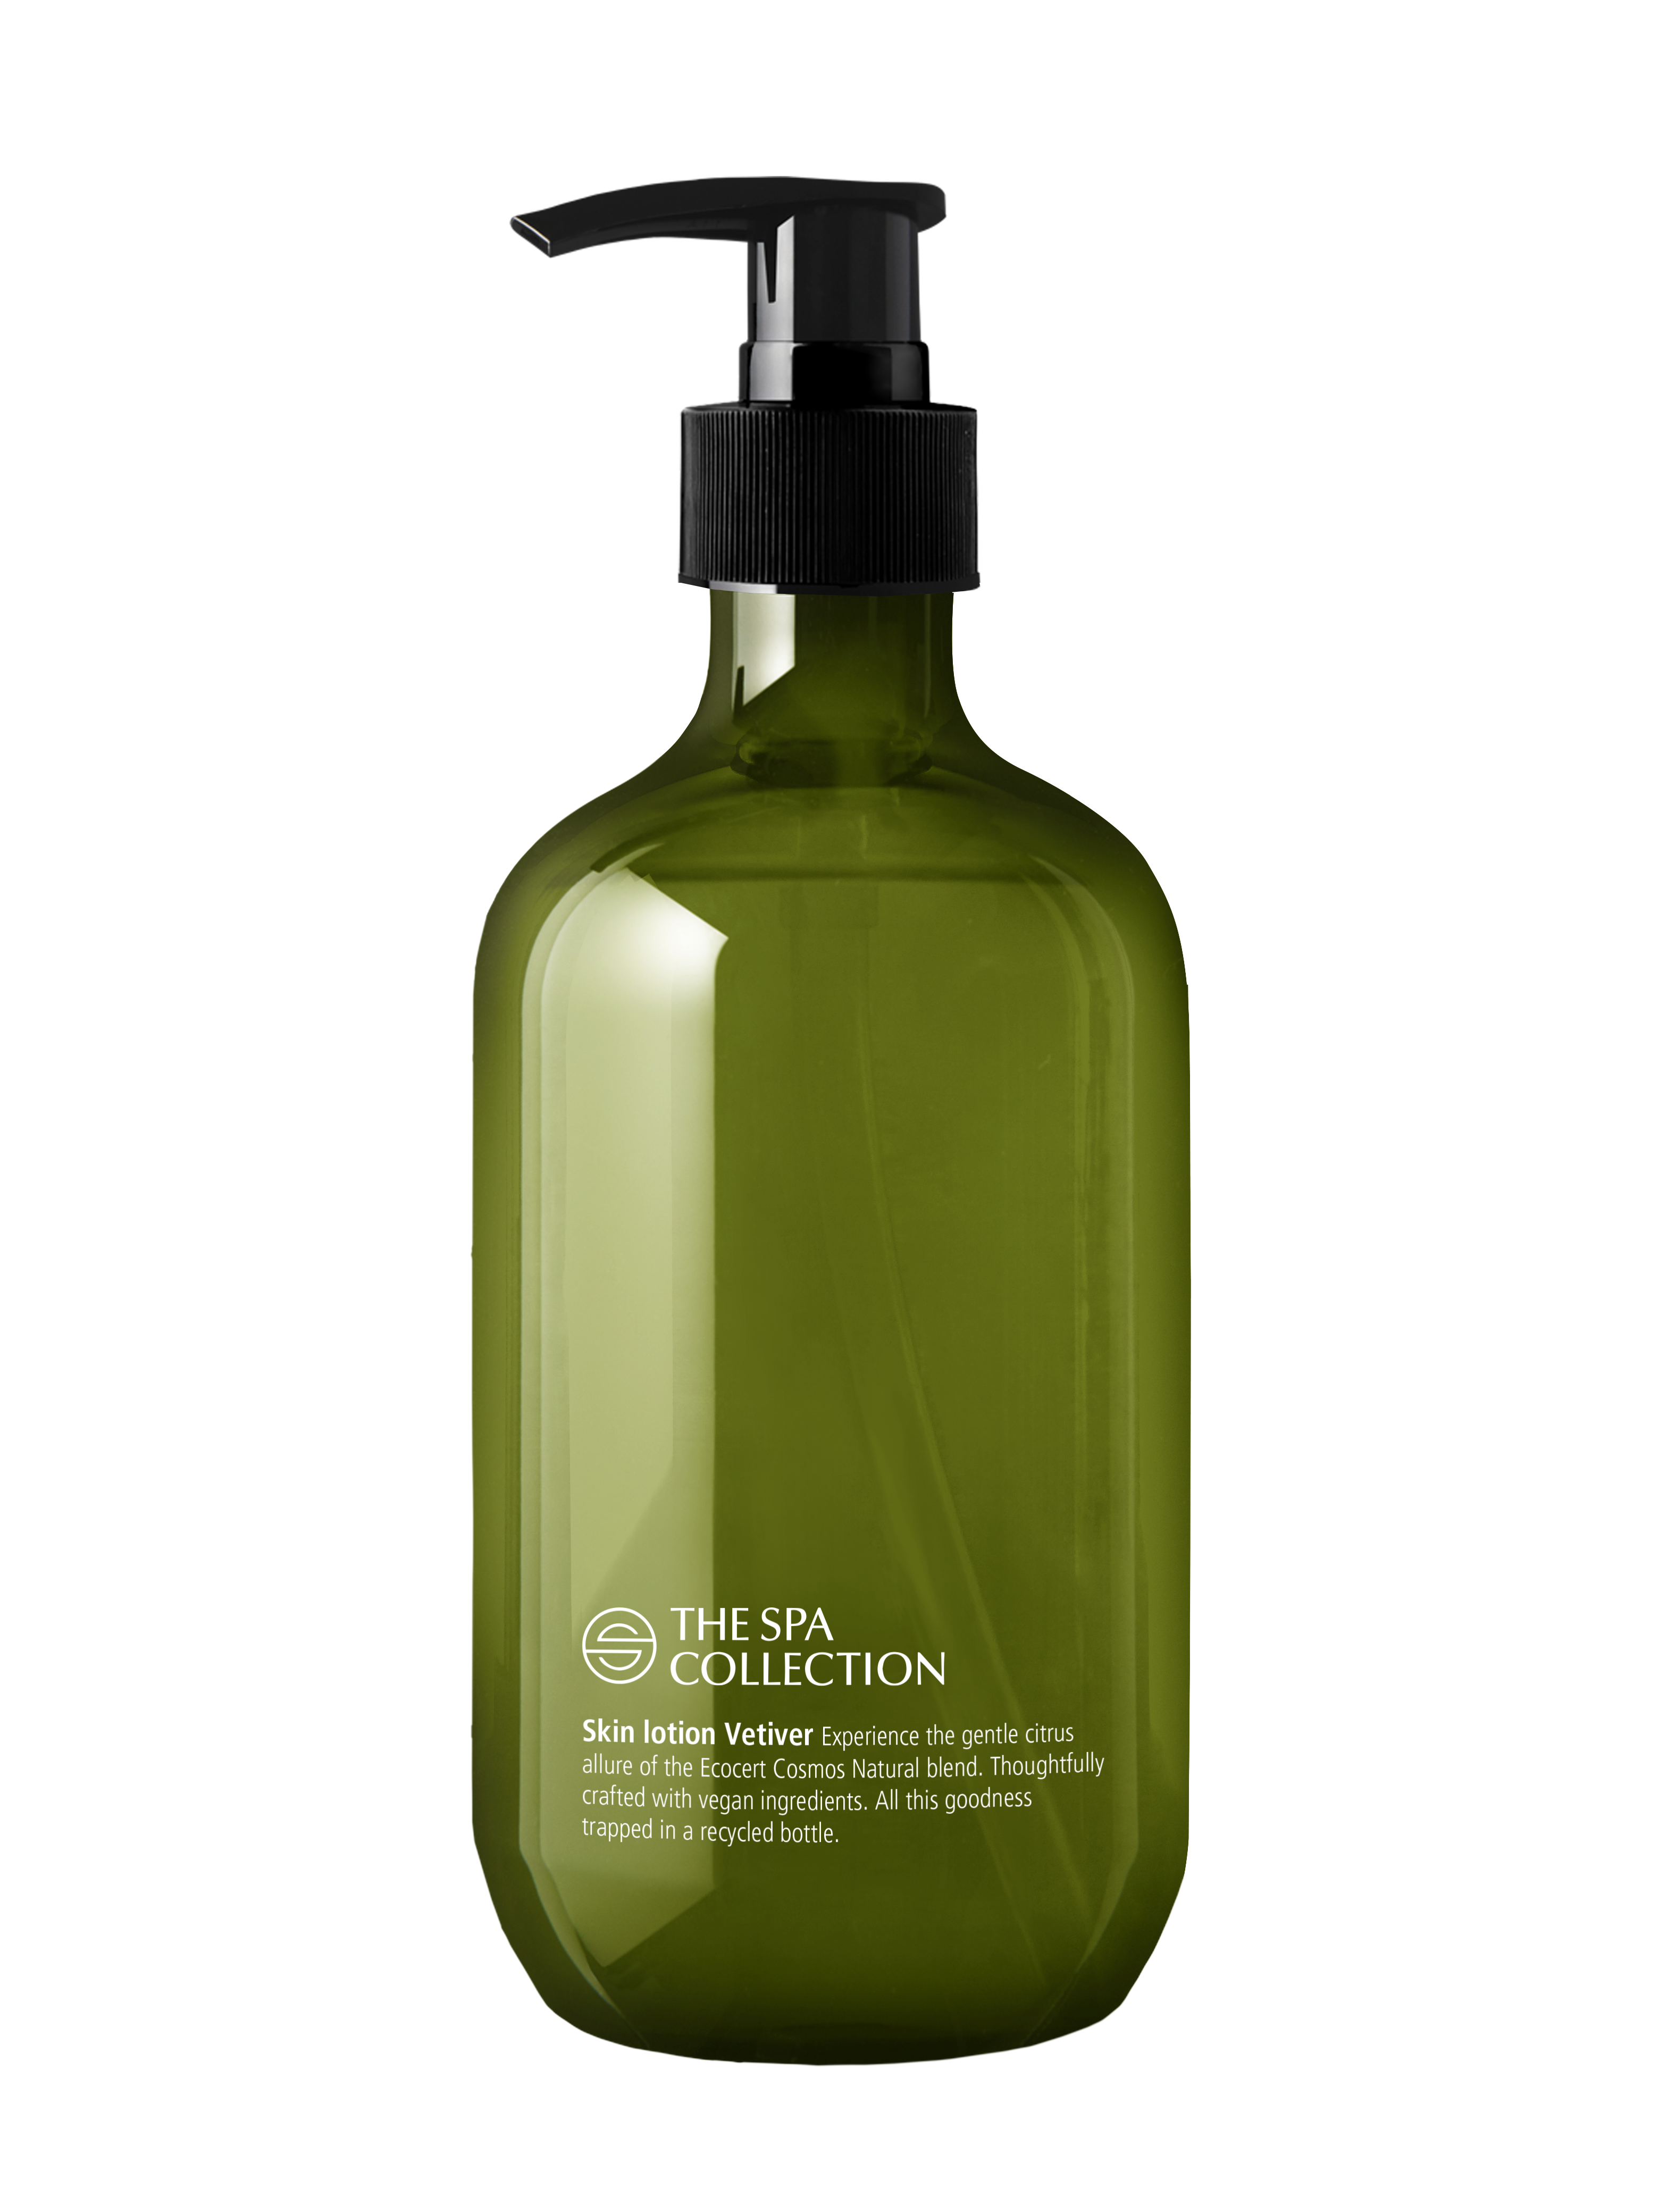 Skin lotion ecocert - 475ml recycled bottle - The Spa Collection Vetiver